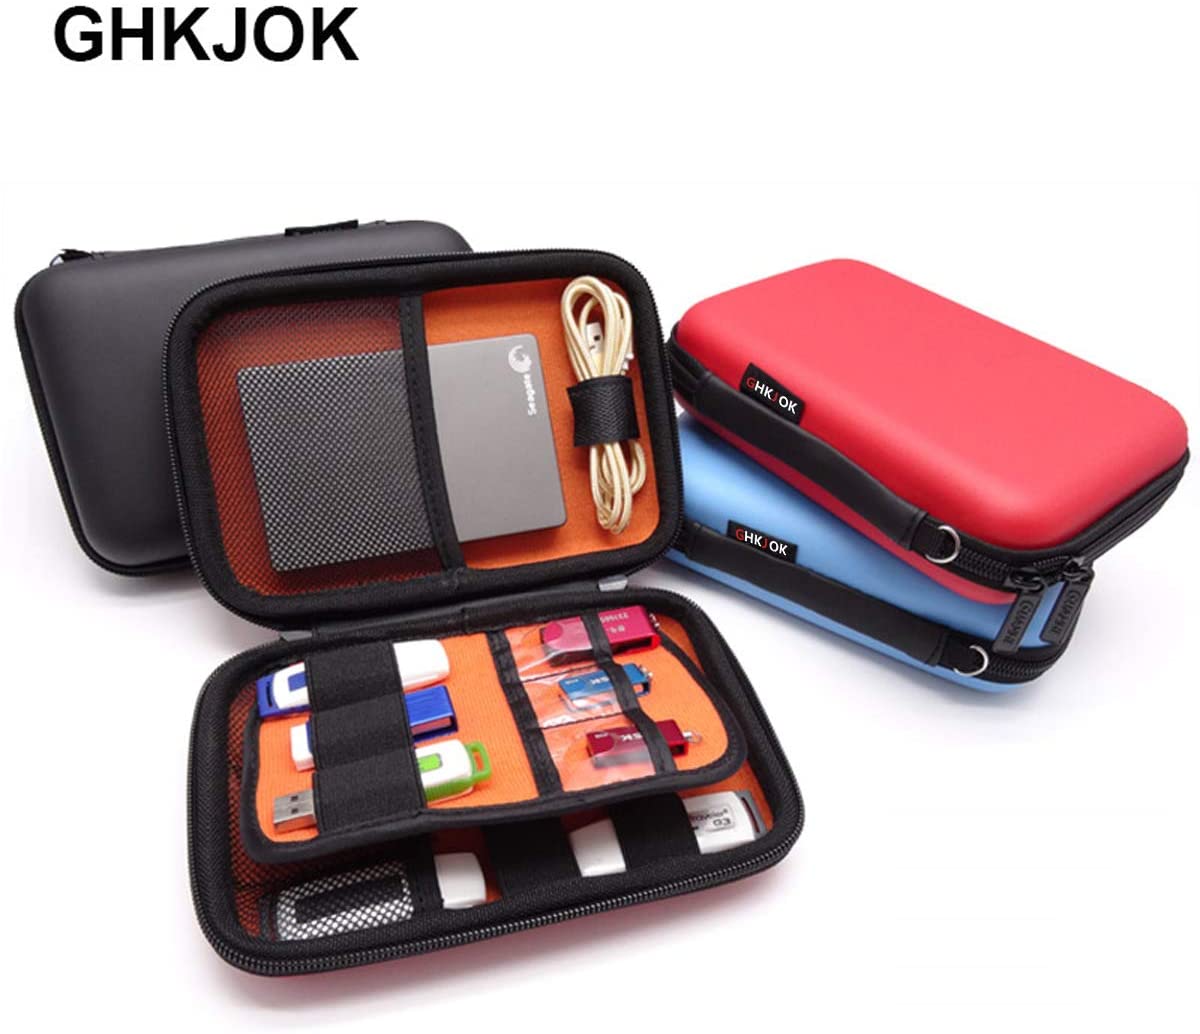 GHKJOK Electronics Bag Cable Hard Shell Organizer Water-Resistant Carry Case for Kindle Keys Chargers. - e4cents